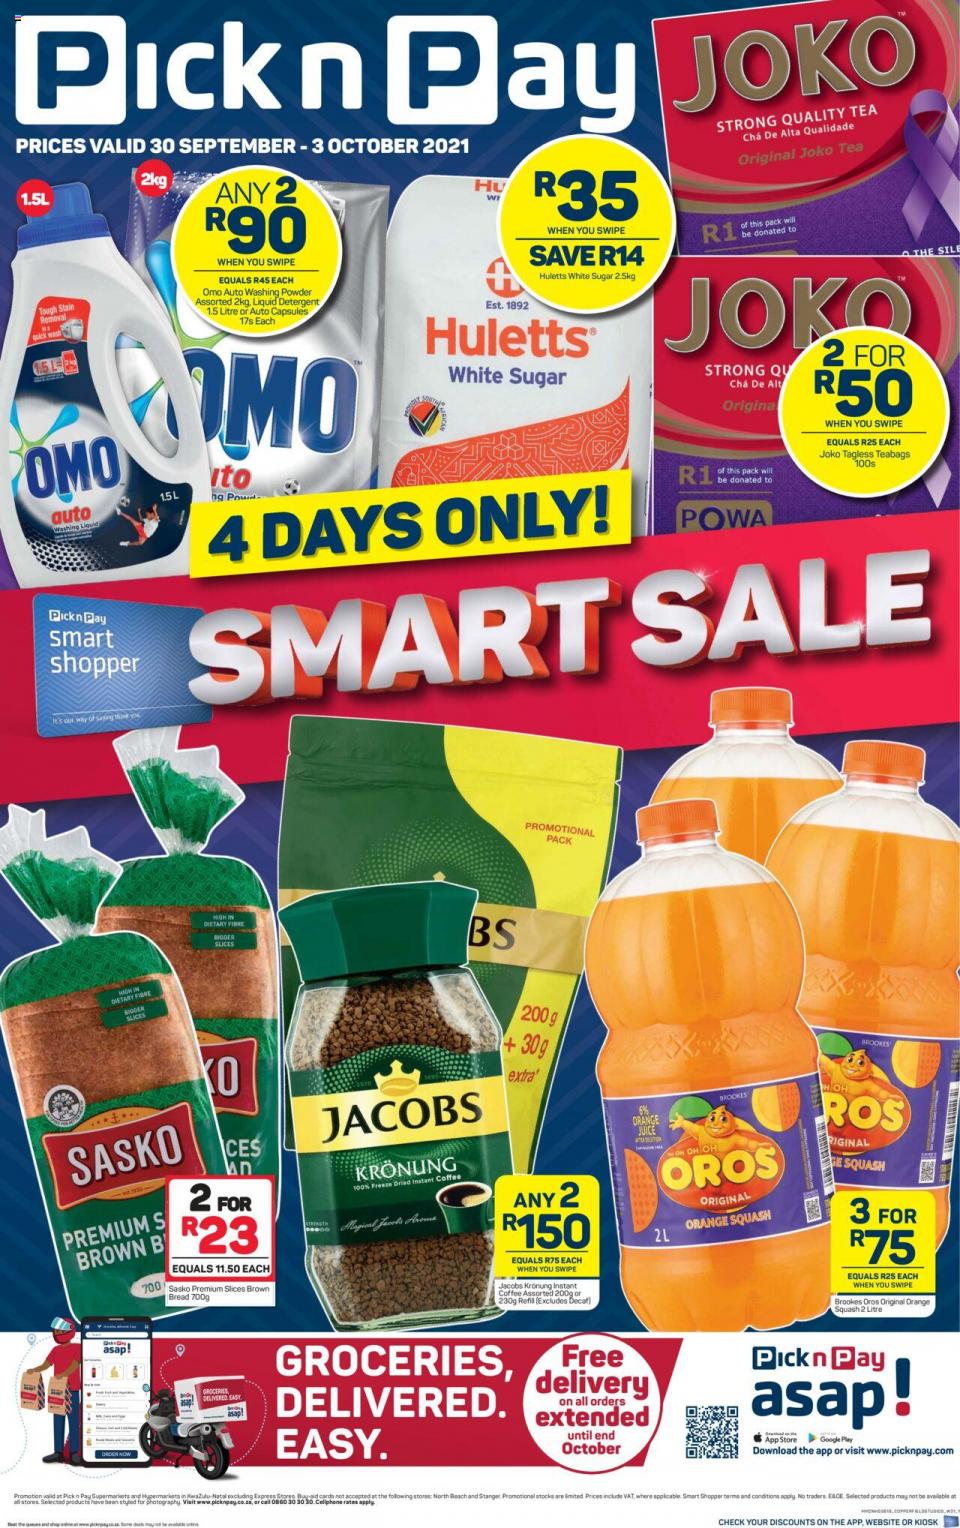 Pick n Pay Specials Smart Sale 30 Sep – 3 Oct 2021